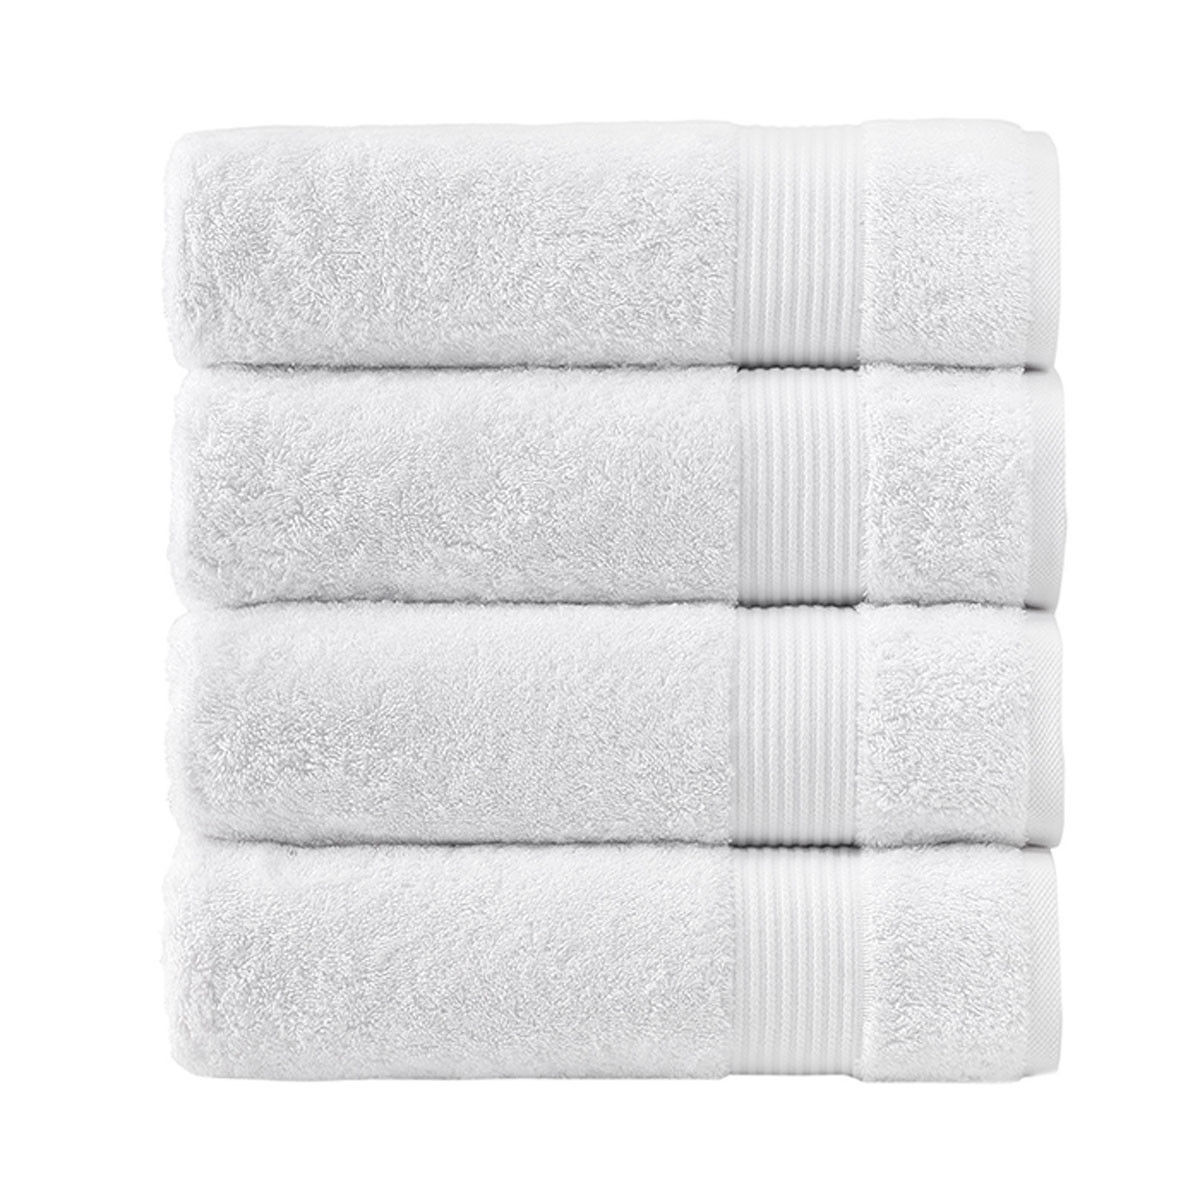 From where are the bulk Turkish blankets in the Amadeus White Towel Collection shipped?